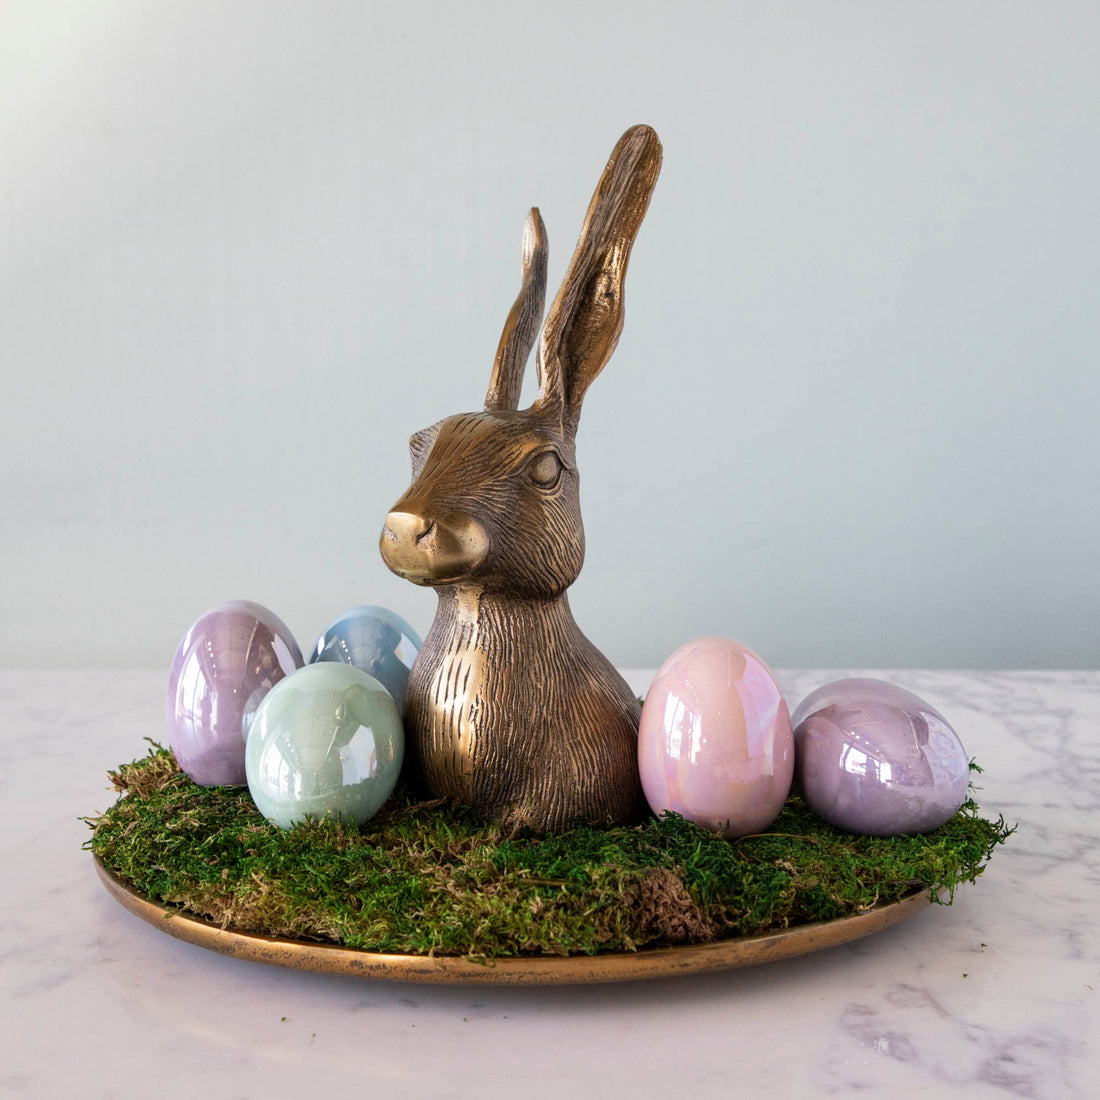 A Hare Platter by Accent Decor sits on top of a whimsy covered table.